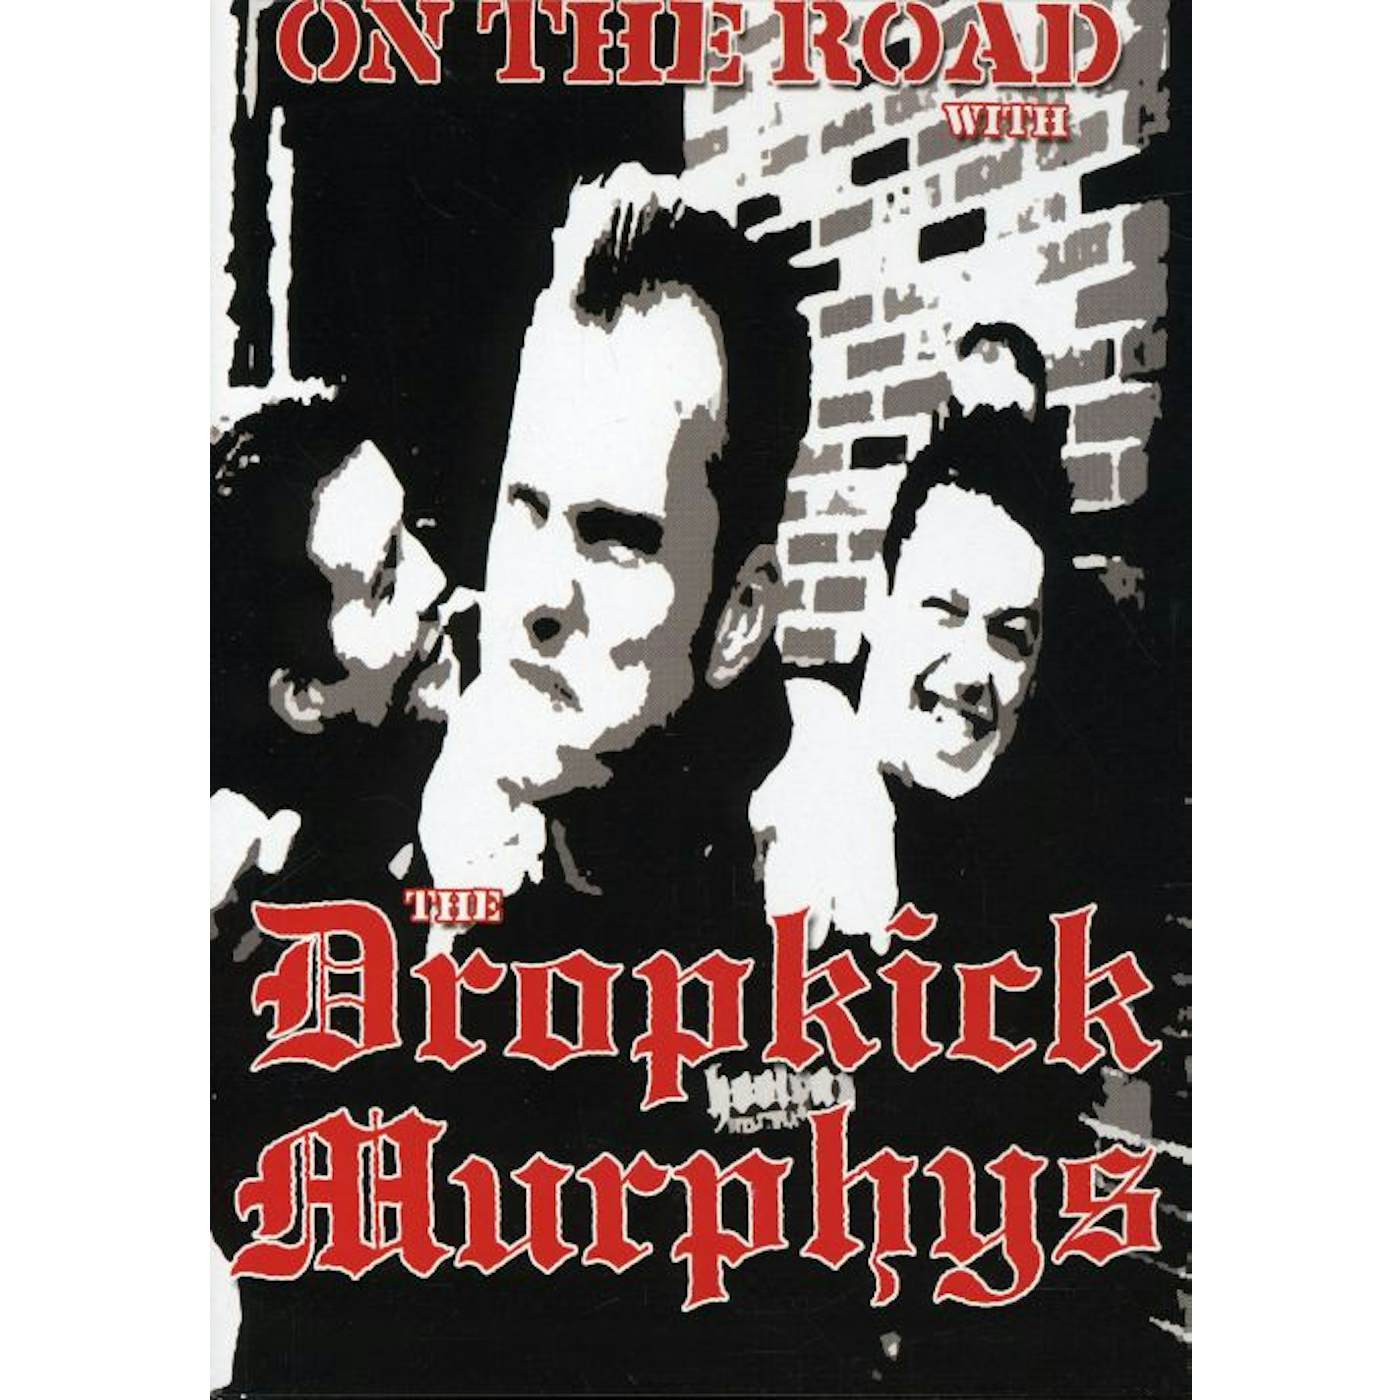 ON THE ROAD WITH THE DROPKICK MURPHYS DVD